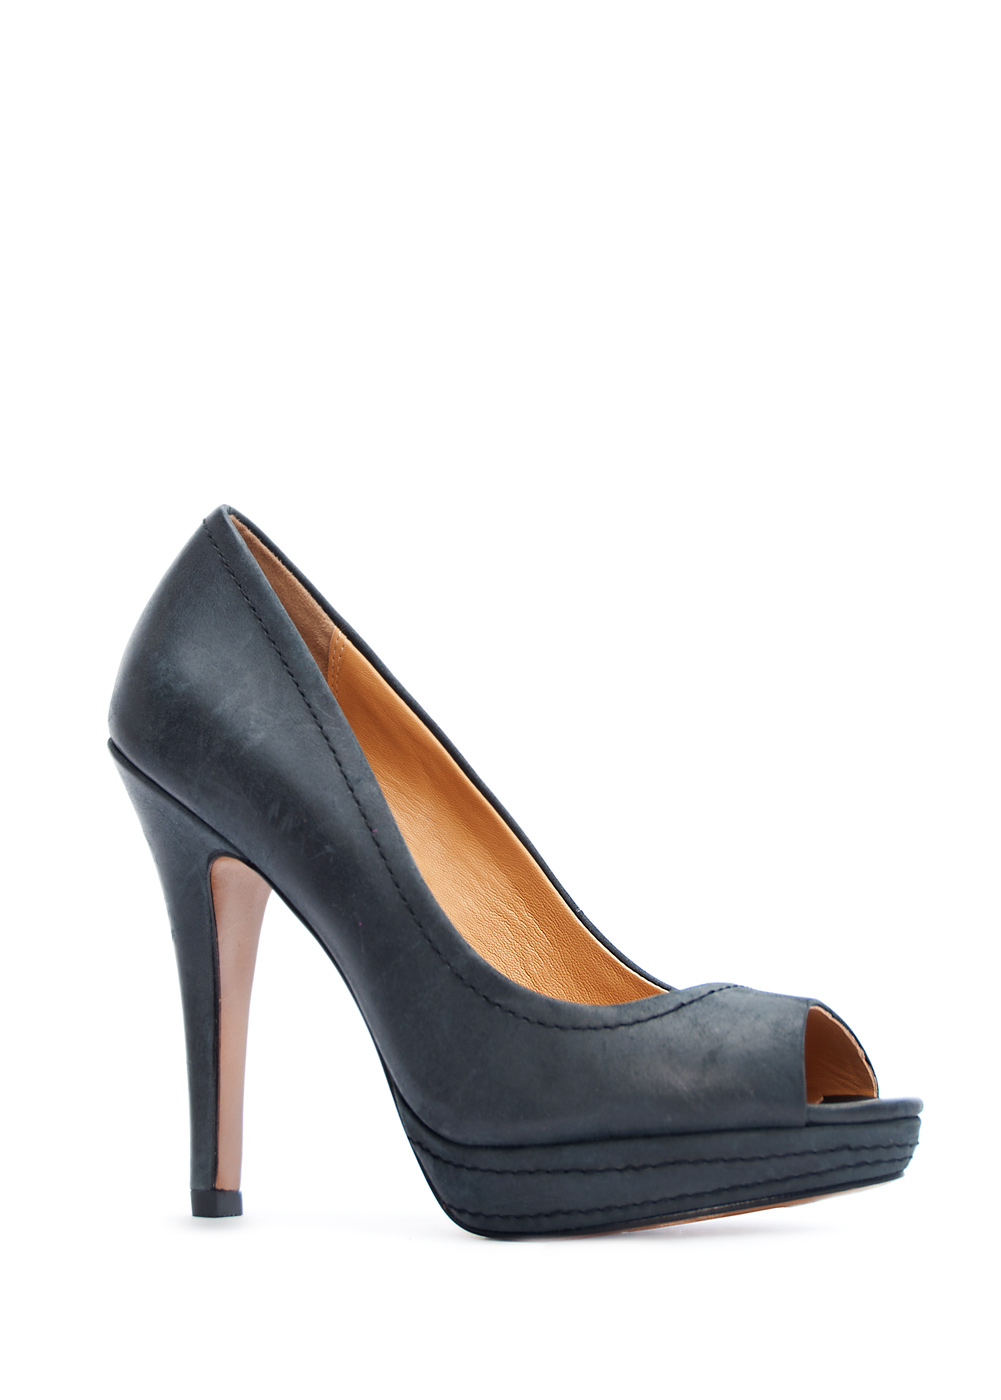 Lyst - Mango Touch - Leather Peep Toe Pumps in Black